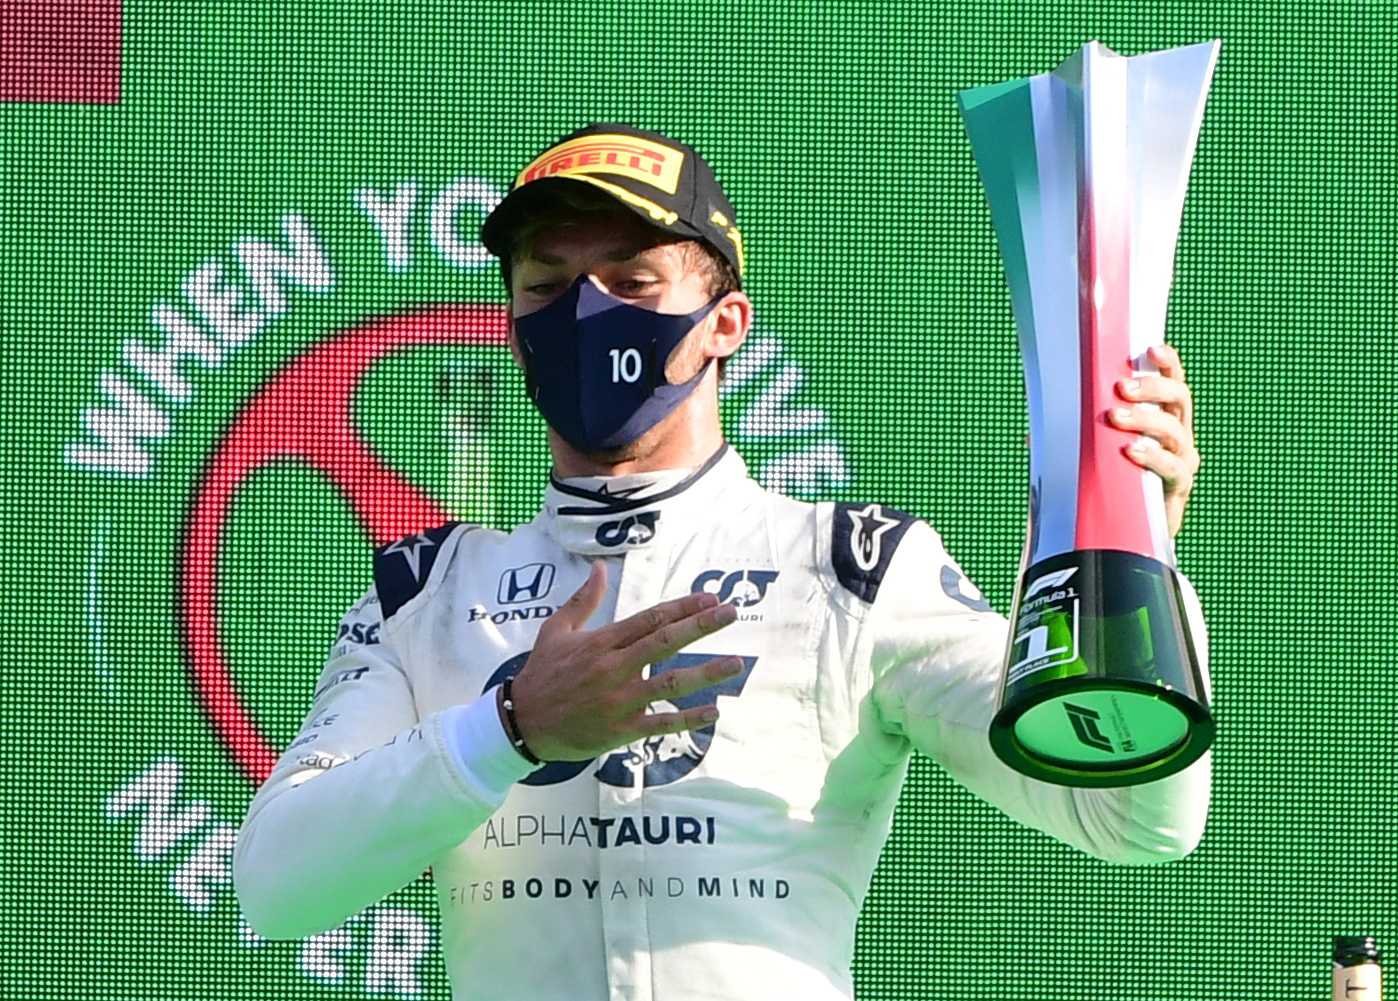 Pierre Gasly poses after winning the Italian Grand Prix